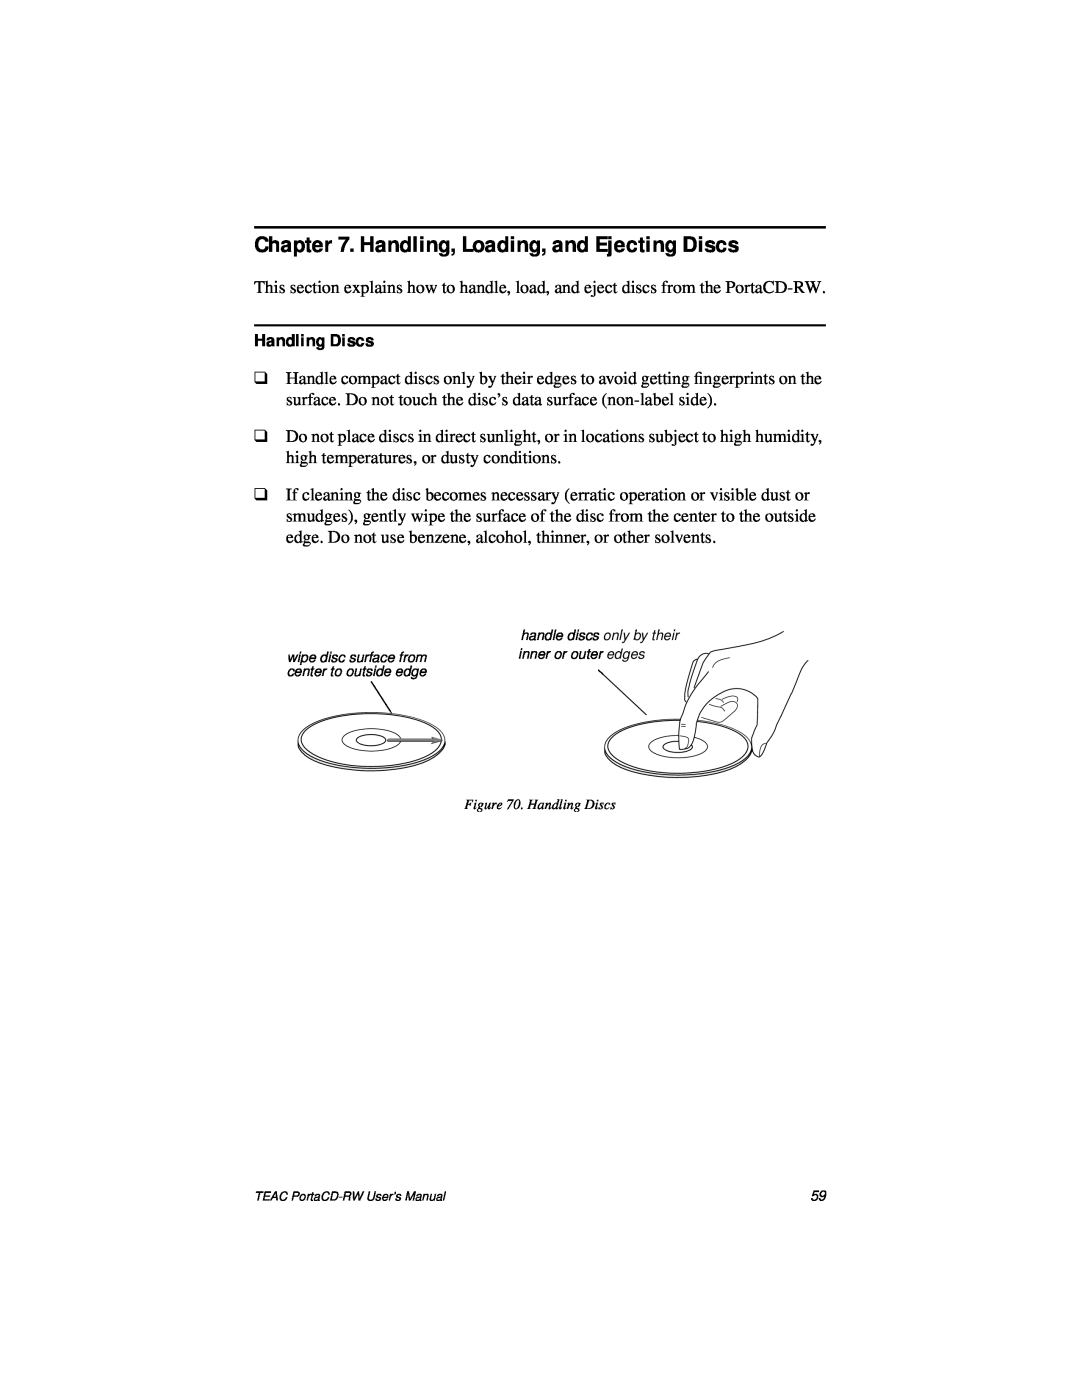 Teac E24E user manual Handling, Loading, and Ejecting Discs, Handling Discs 